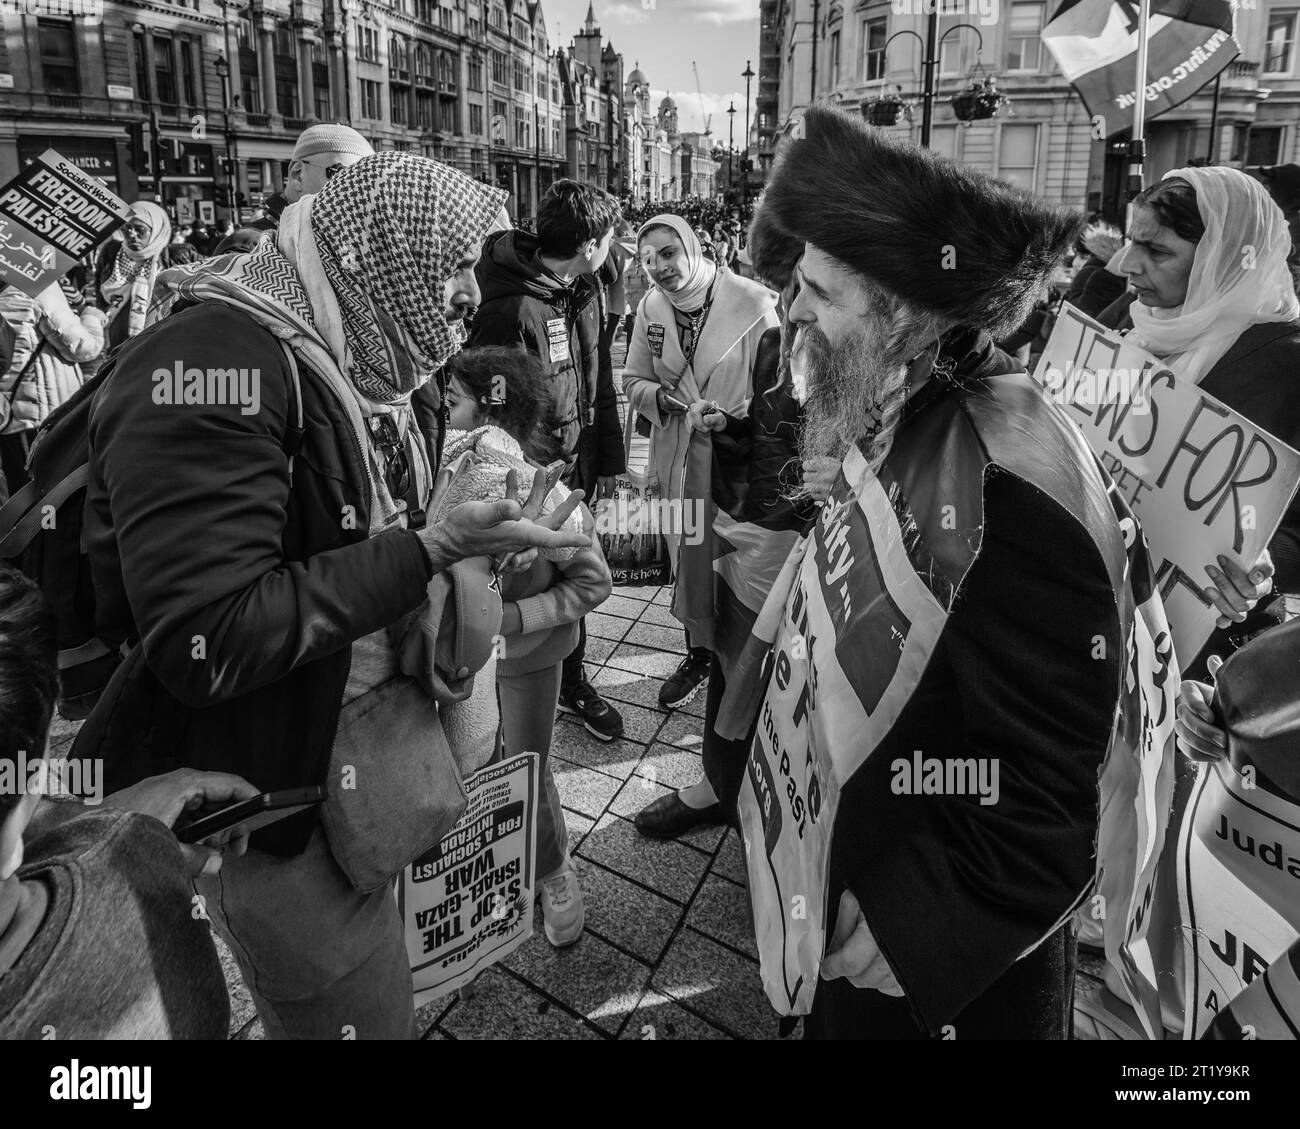 Black and white image of Jewish and Arabic people conversing respectfully at Pro Palestinian march in London. Stock Photo